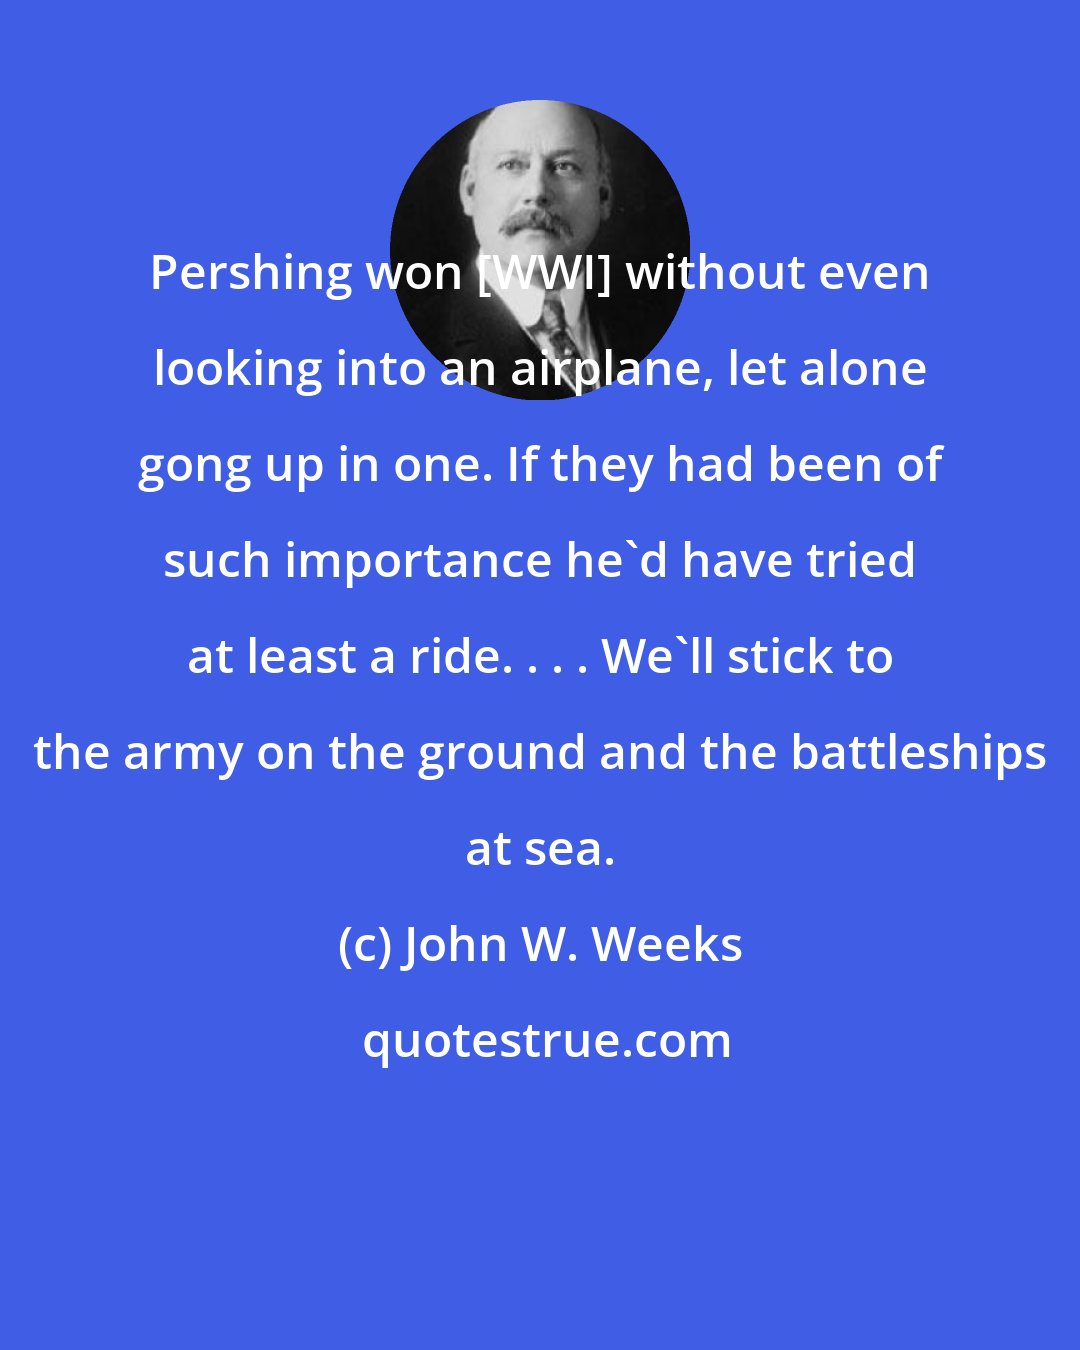 John W. Weeks: Pershing won [WWI] without even looking into an airplane, let alone gong up in one. If they had been of such importance he'd have tried at least a ride. . . . We'll stick to the army on the ground and the battleships at sea.